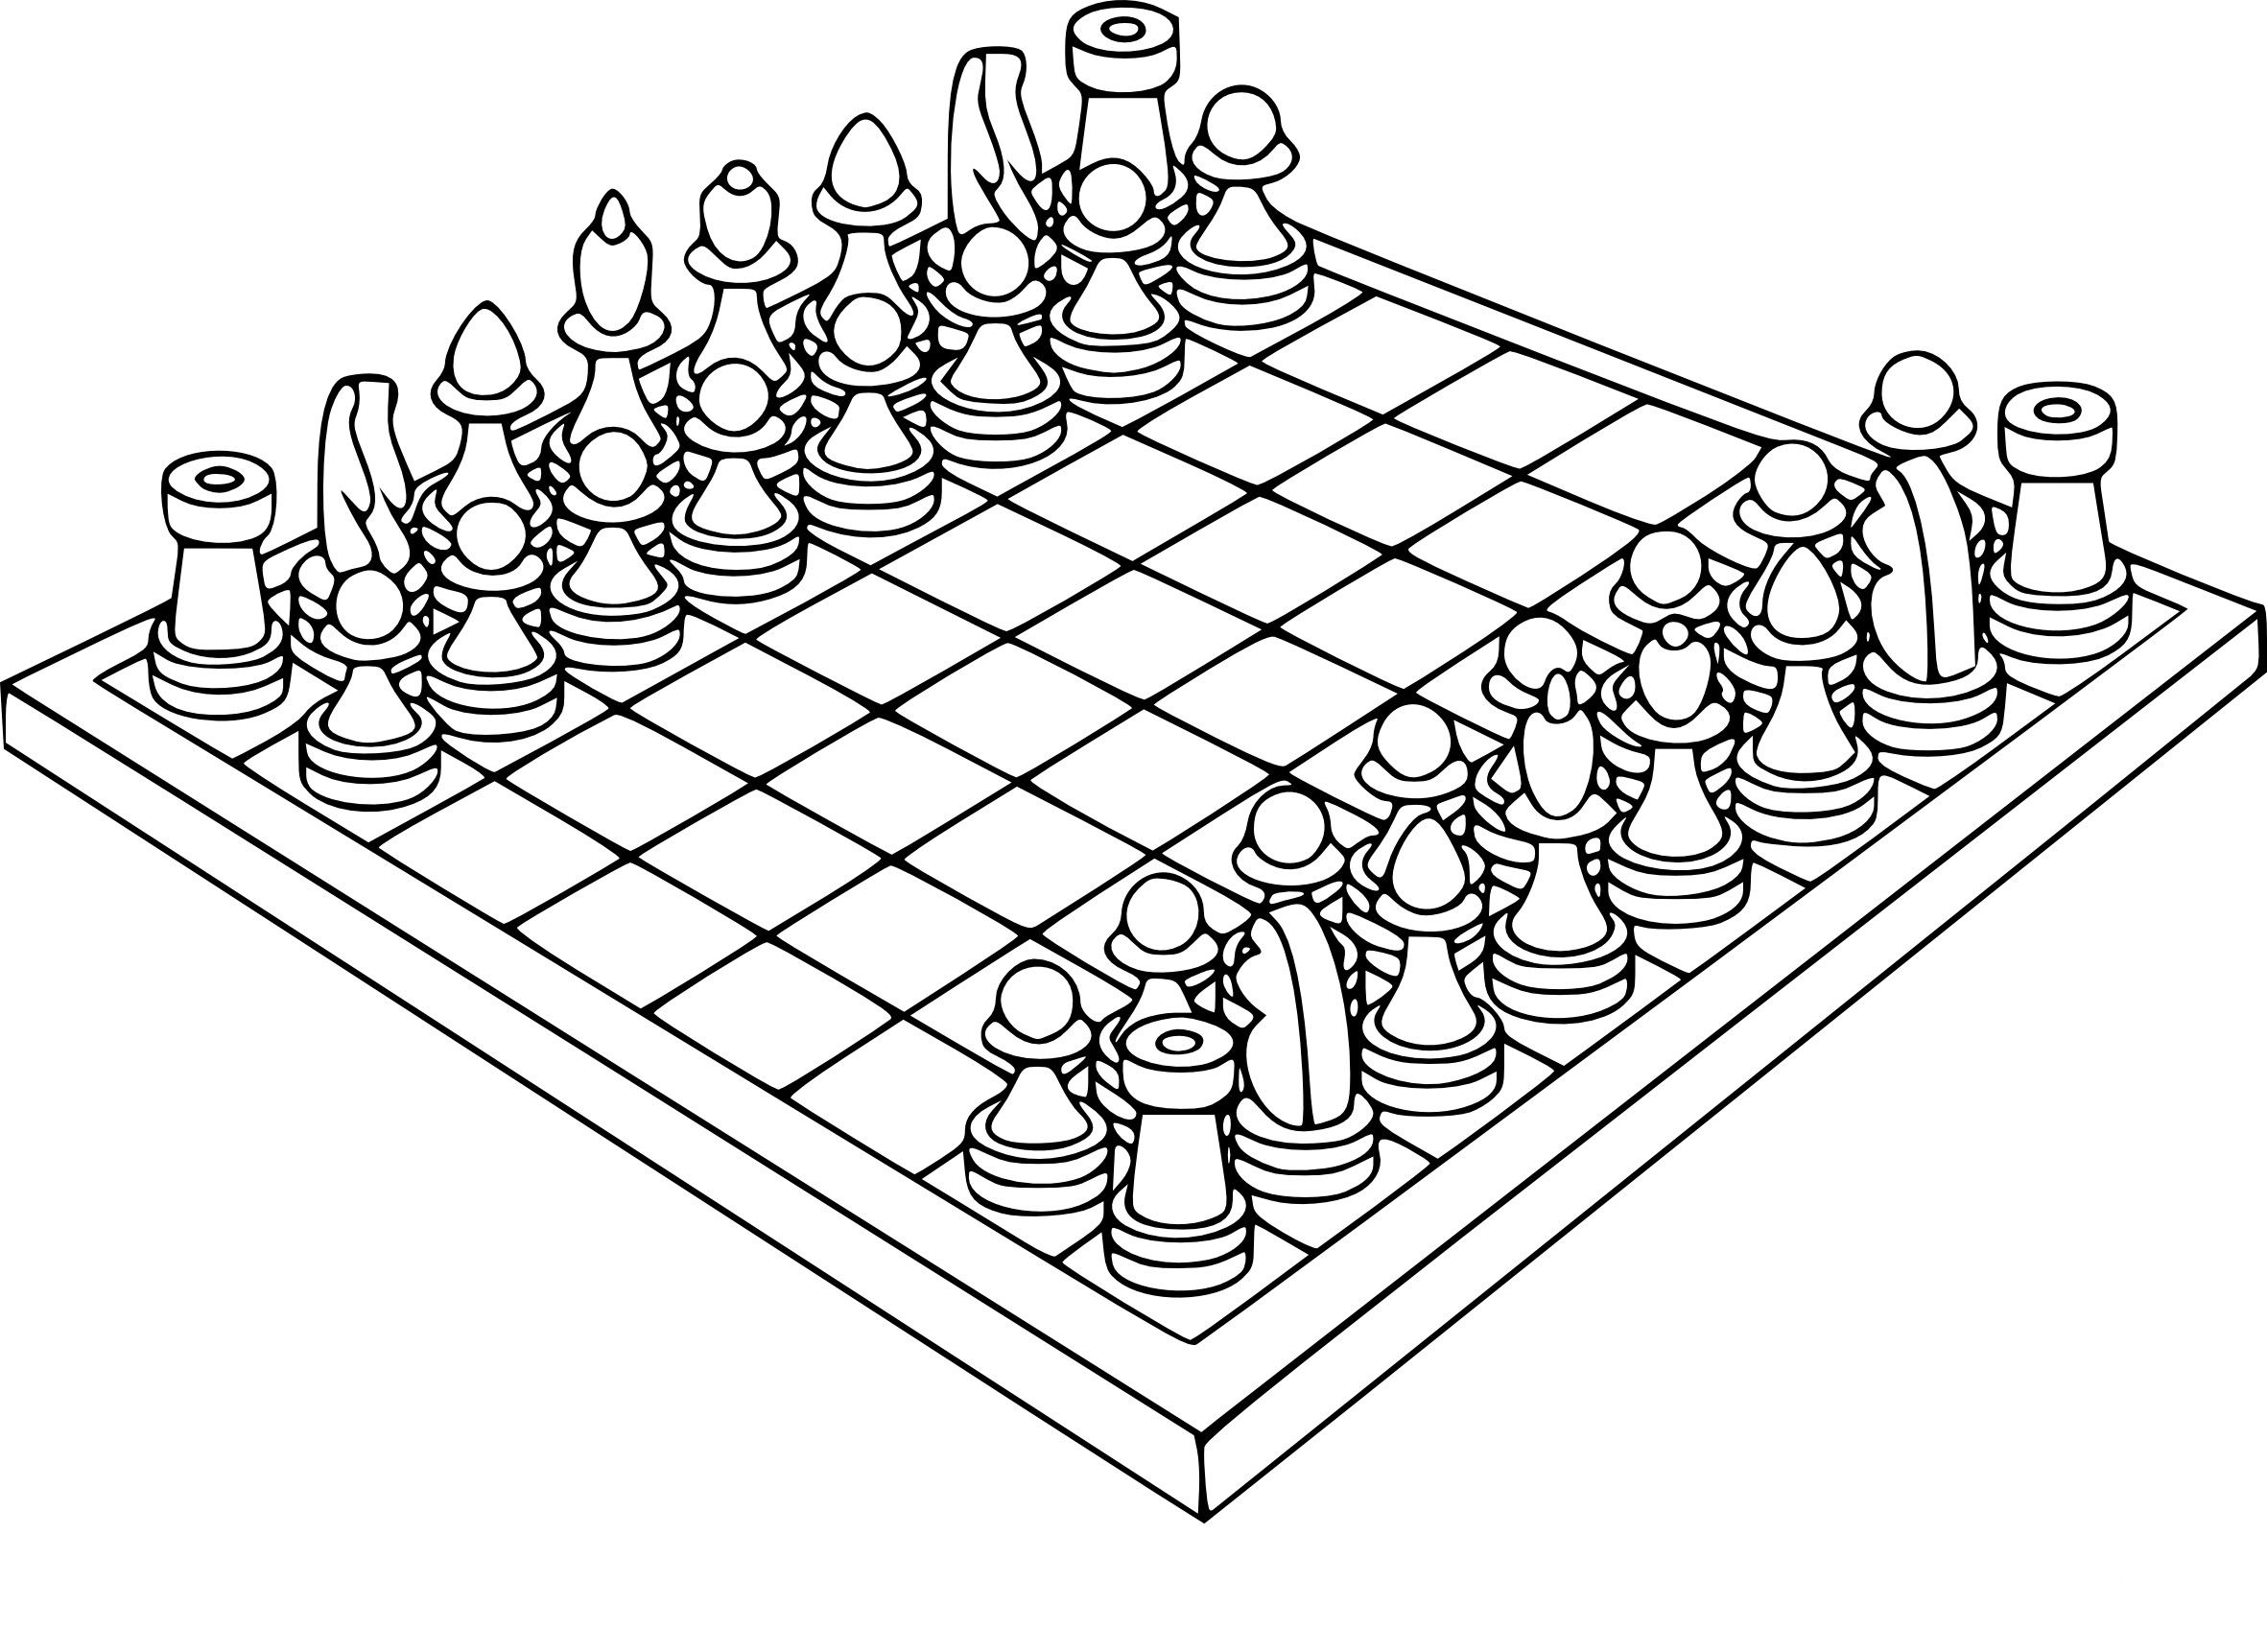 Chess Game Pieces Coloring Pages Coloring Pages